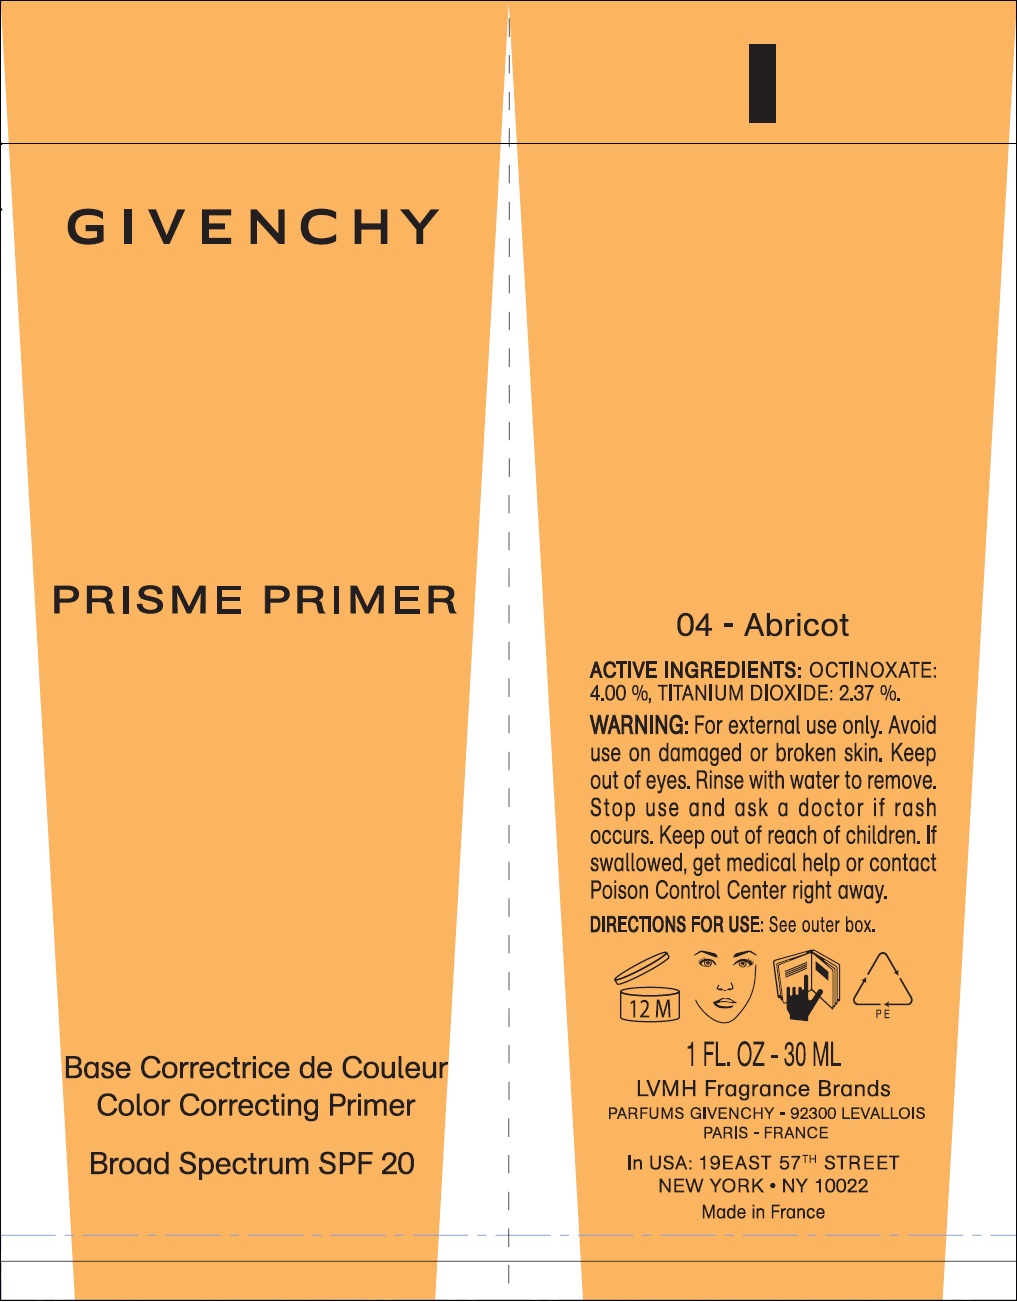 Is Prisme Primer Color Correcting Primer Spf 20 Pa Shade 04 Abricot safe while breastfeeding